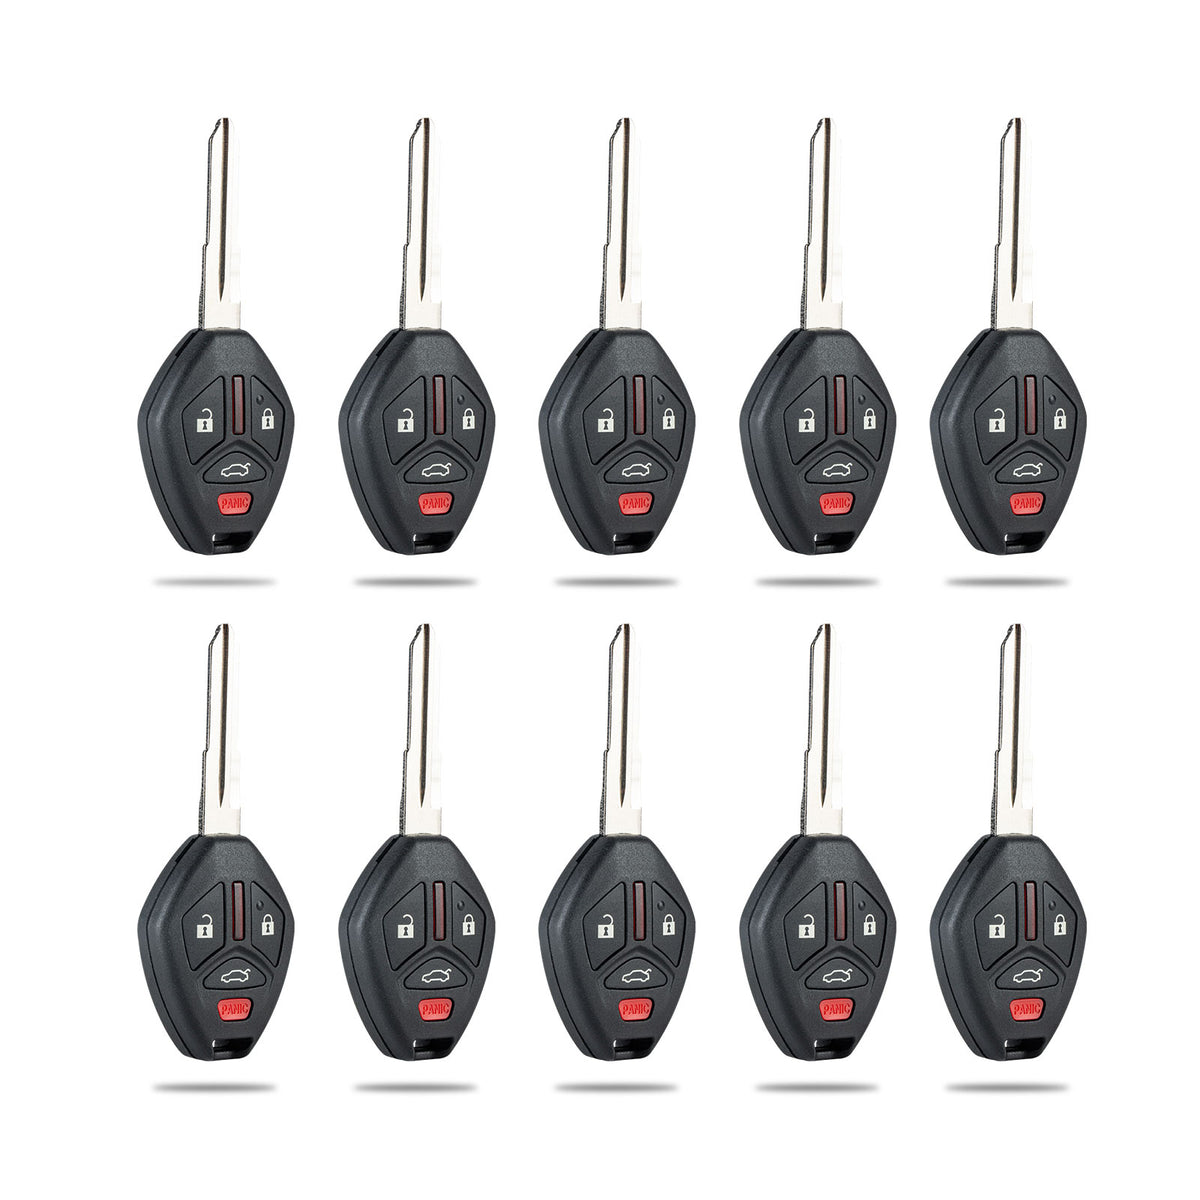 Lots of 10 Extra-Partss Car Remote Fob Replacement for Mitsubishi OUCG8D-625M-A 6370A47 fits Lancer 2007 2008 2009 2010 2011 2012 2013 2014 2015 2016 2017 2018